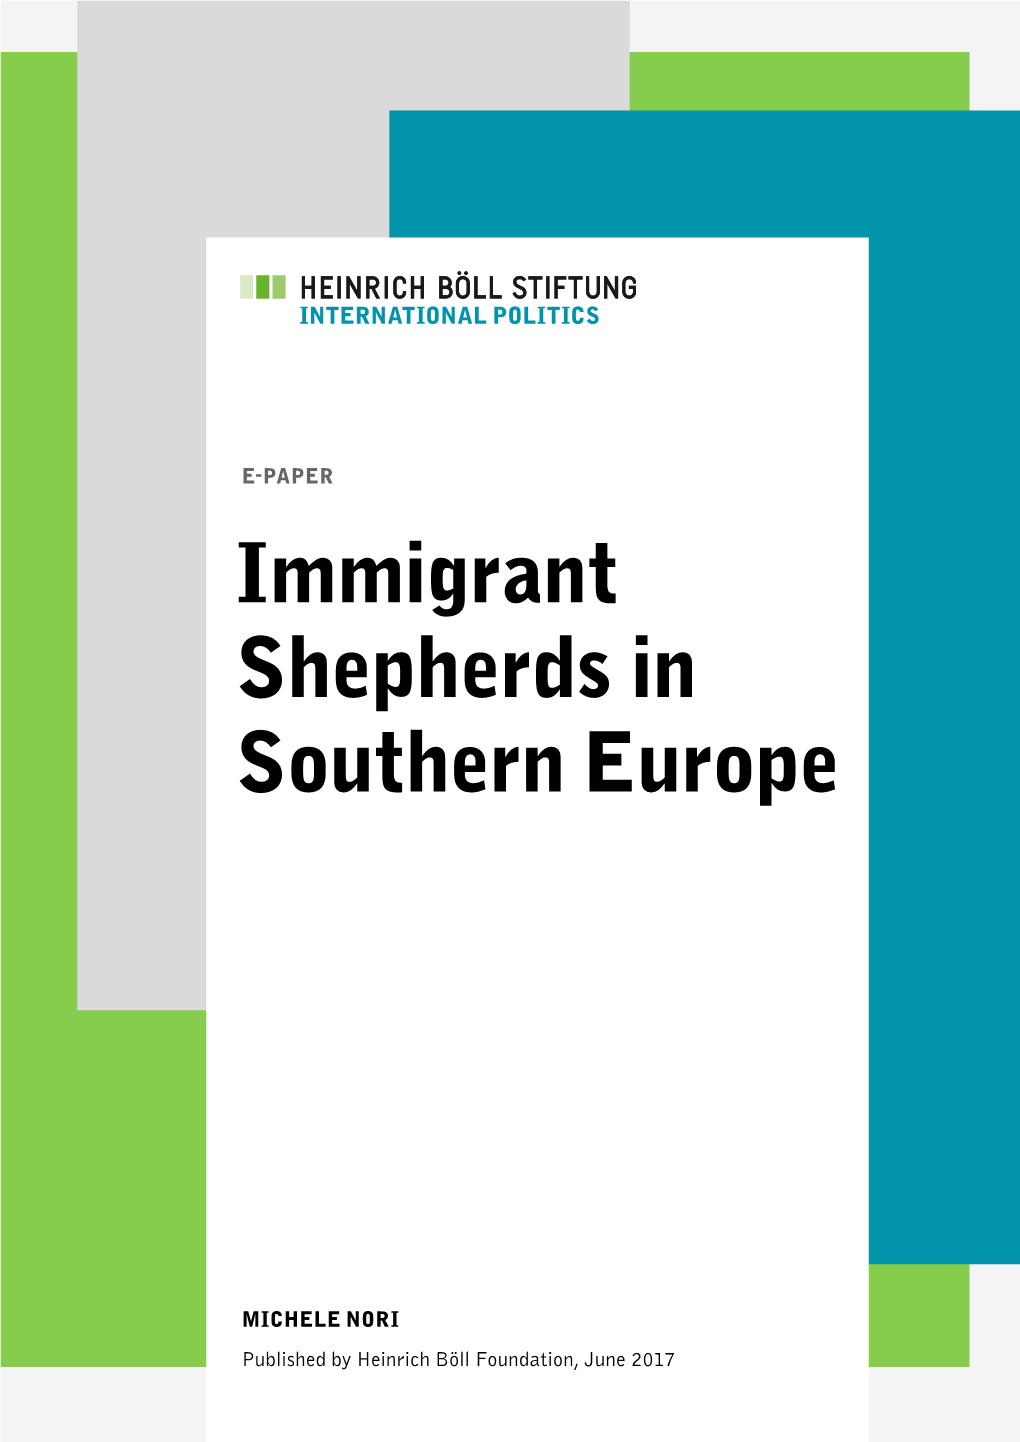 Immigrant Shepherds in Southern Europe